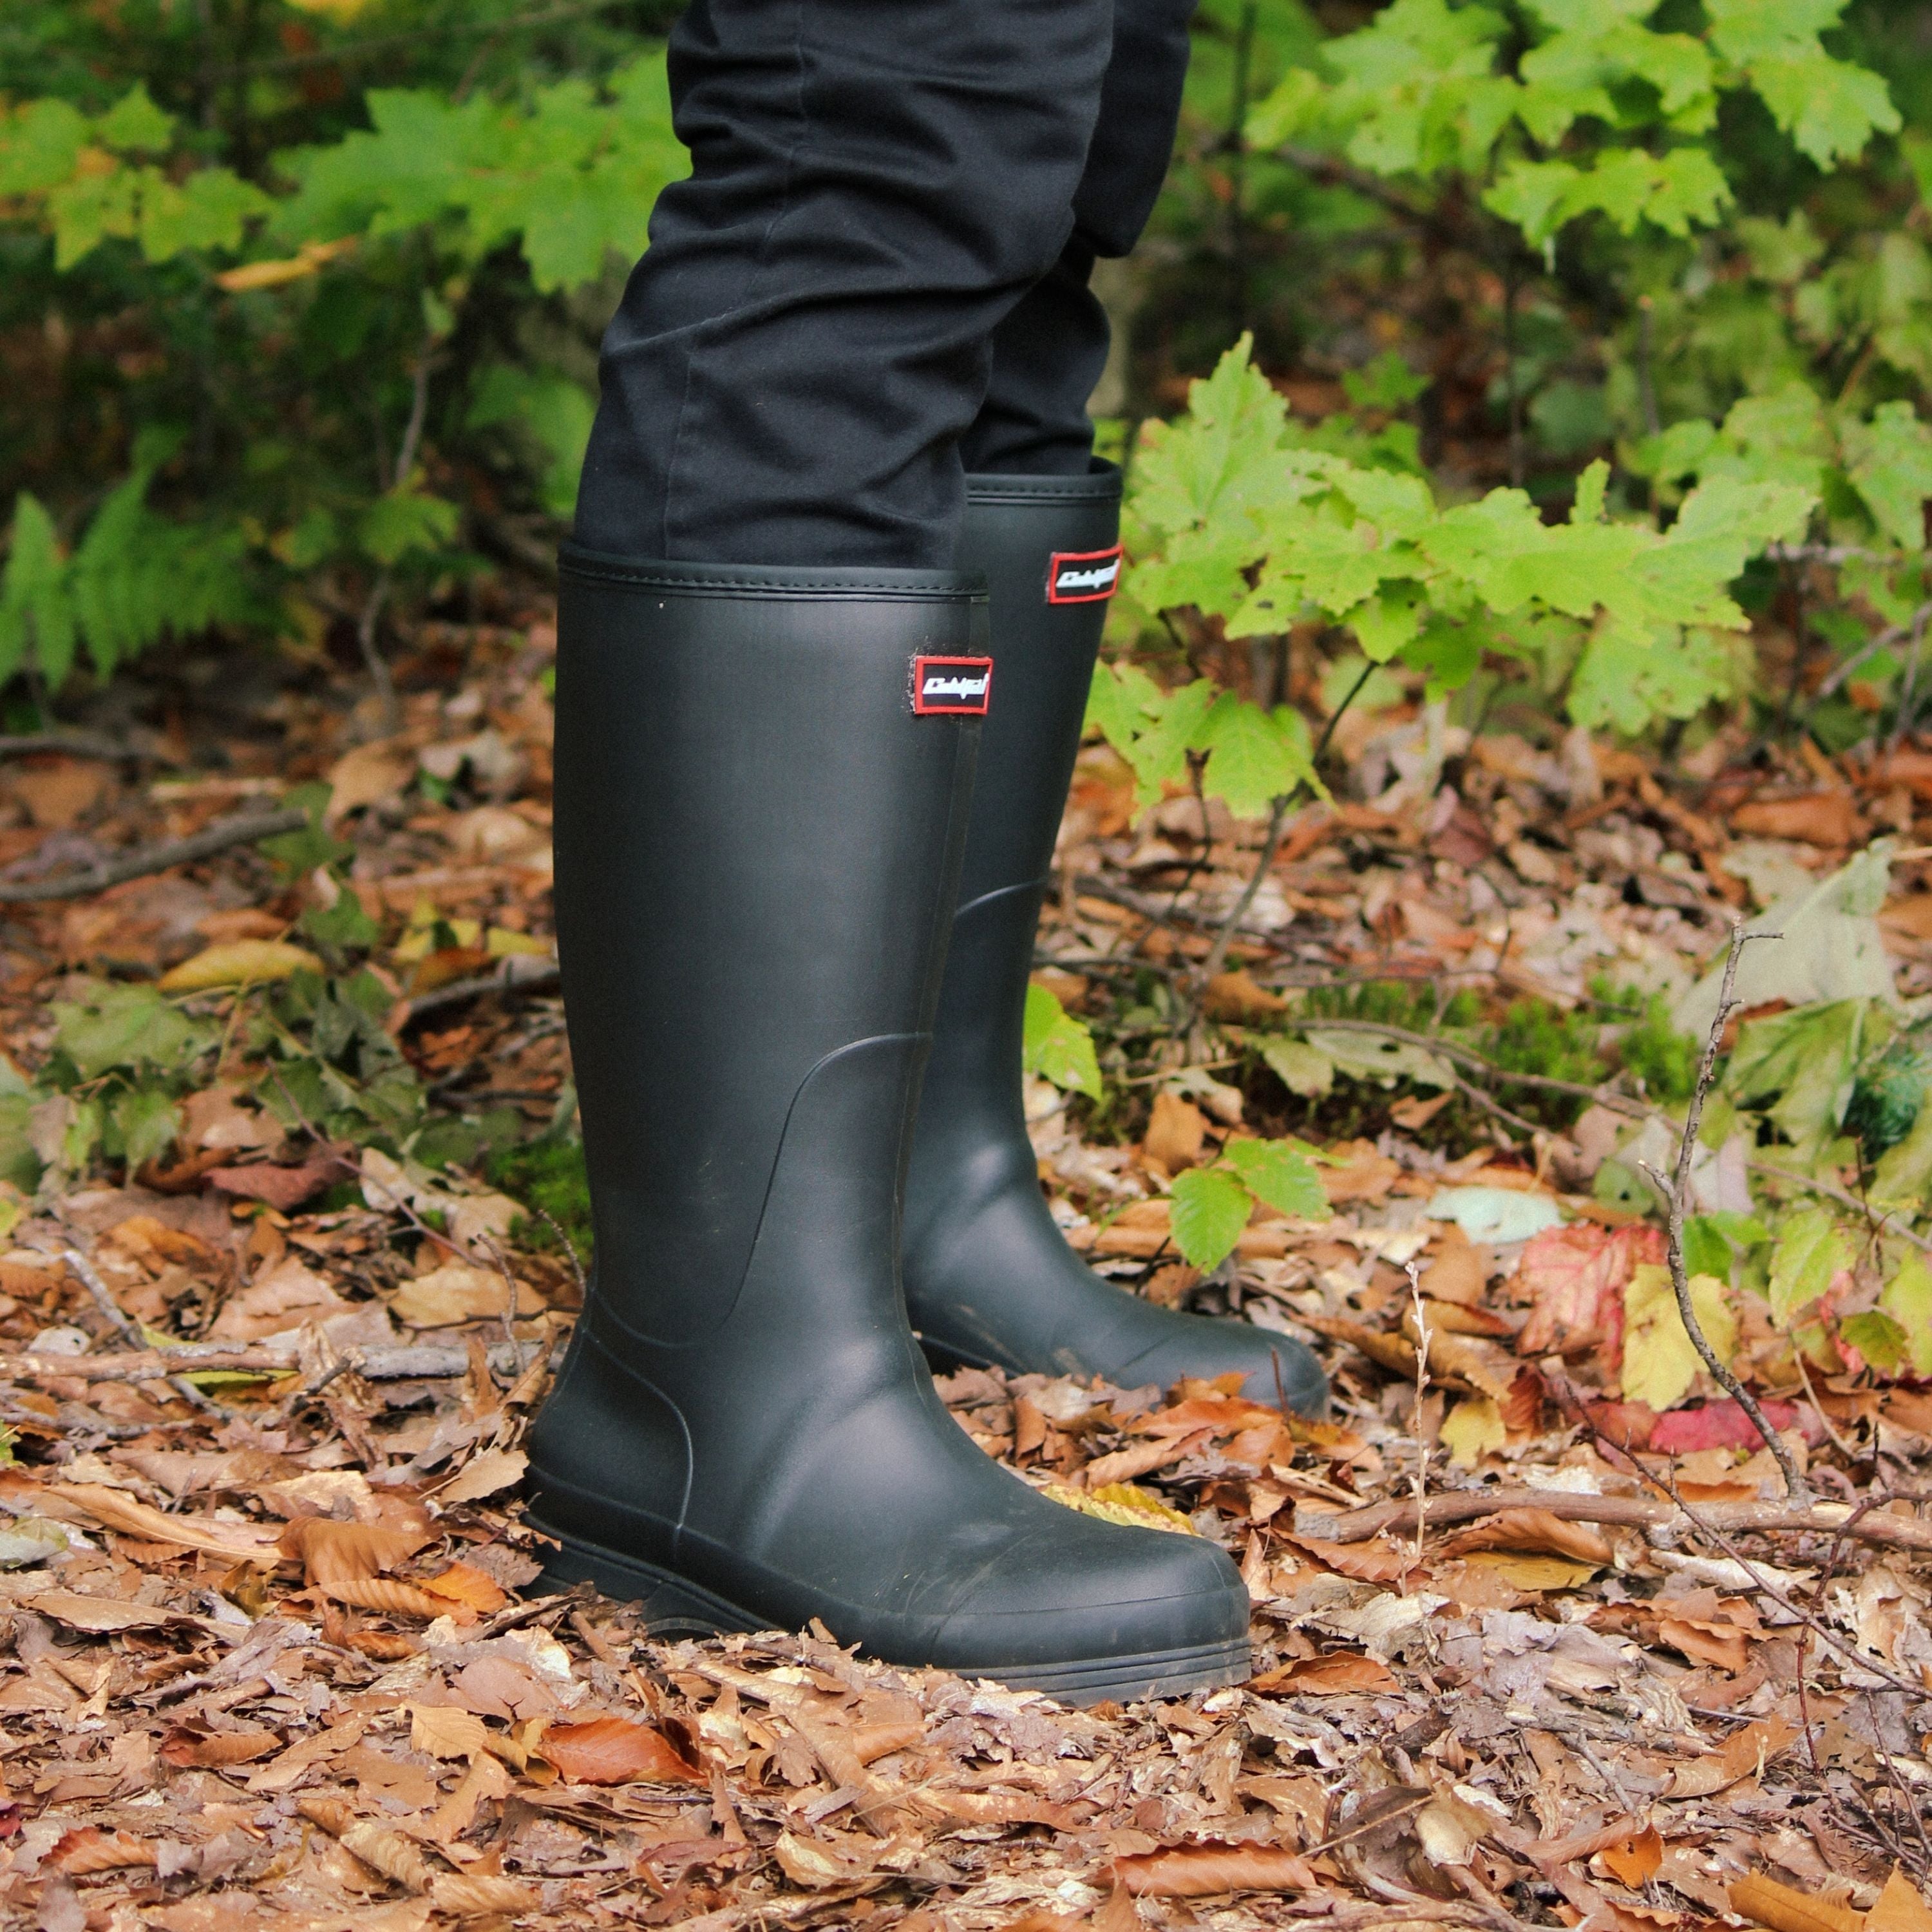 EVA and rubber boots - Men’s